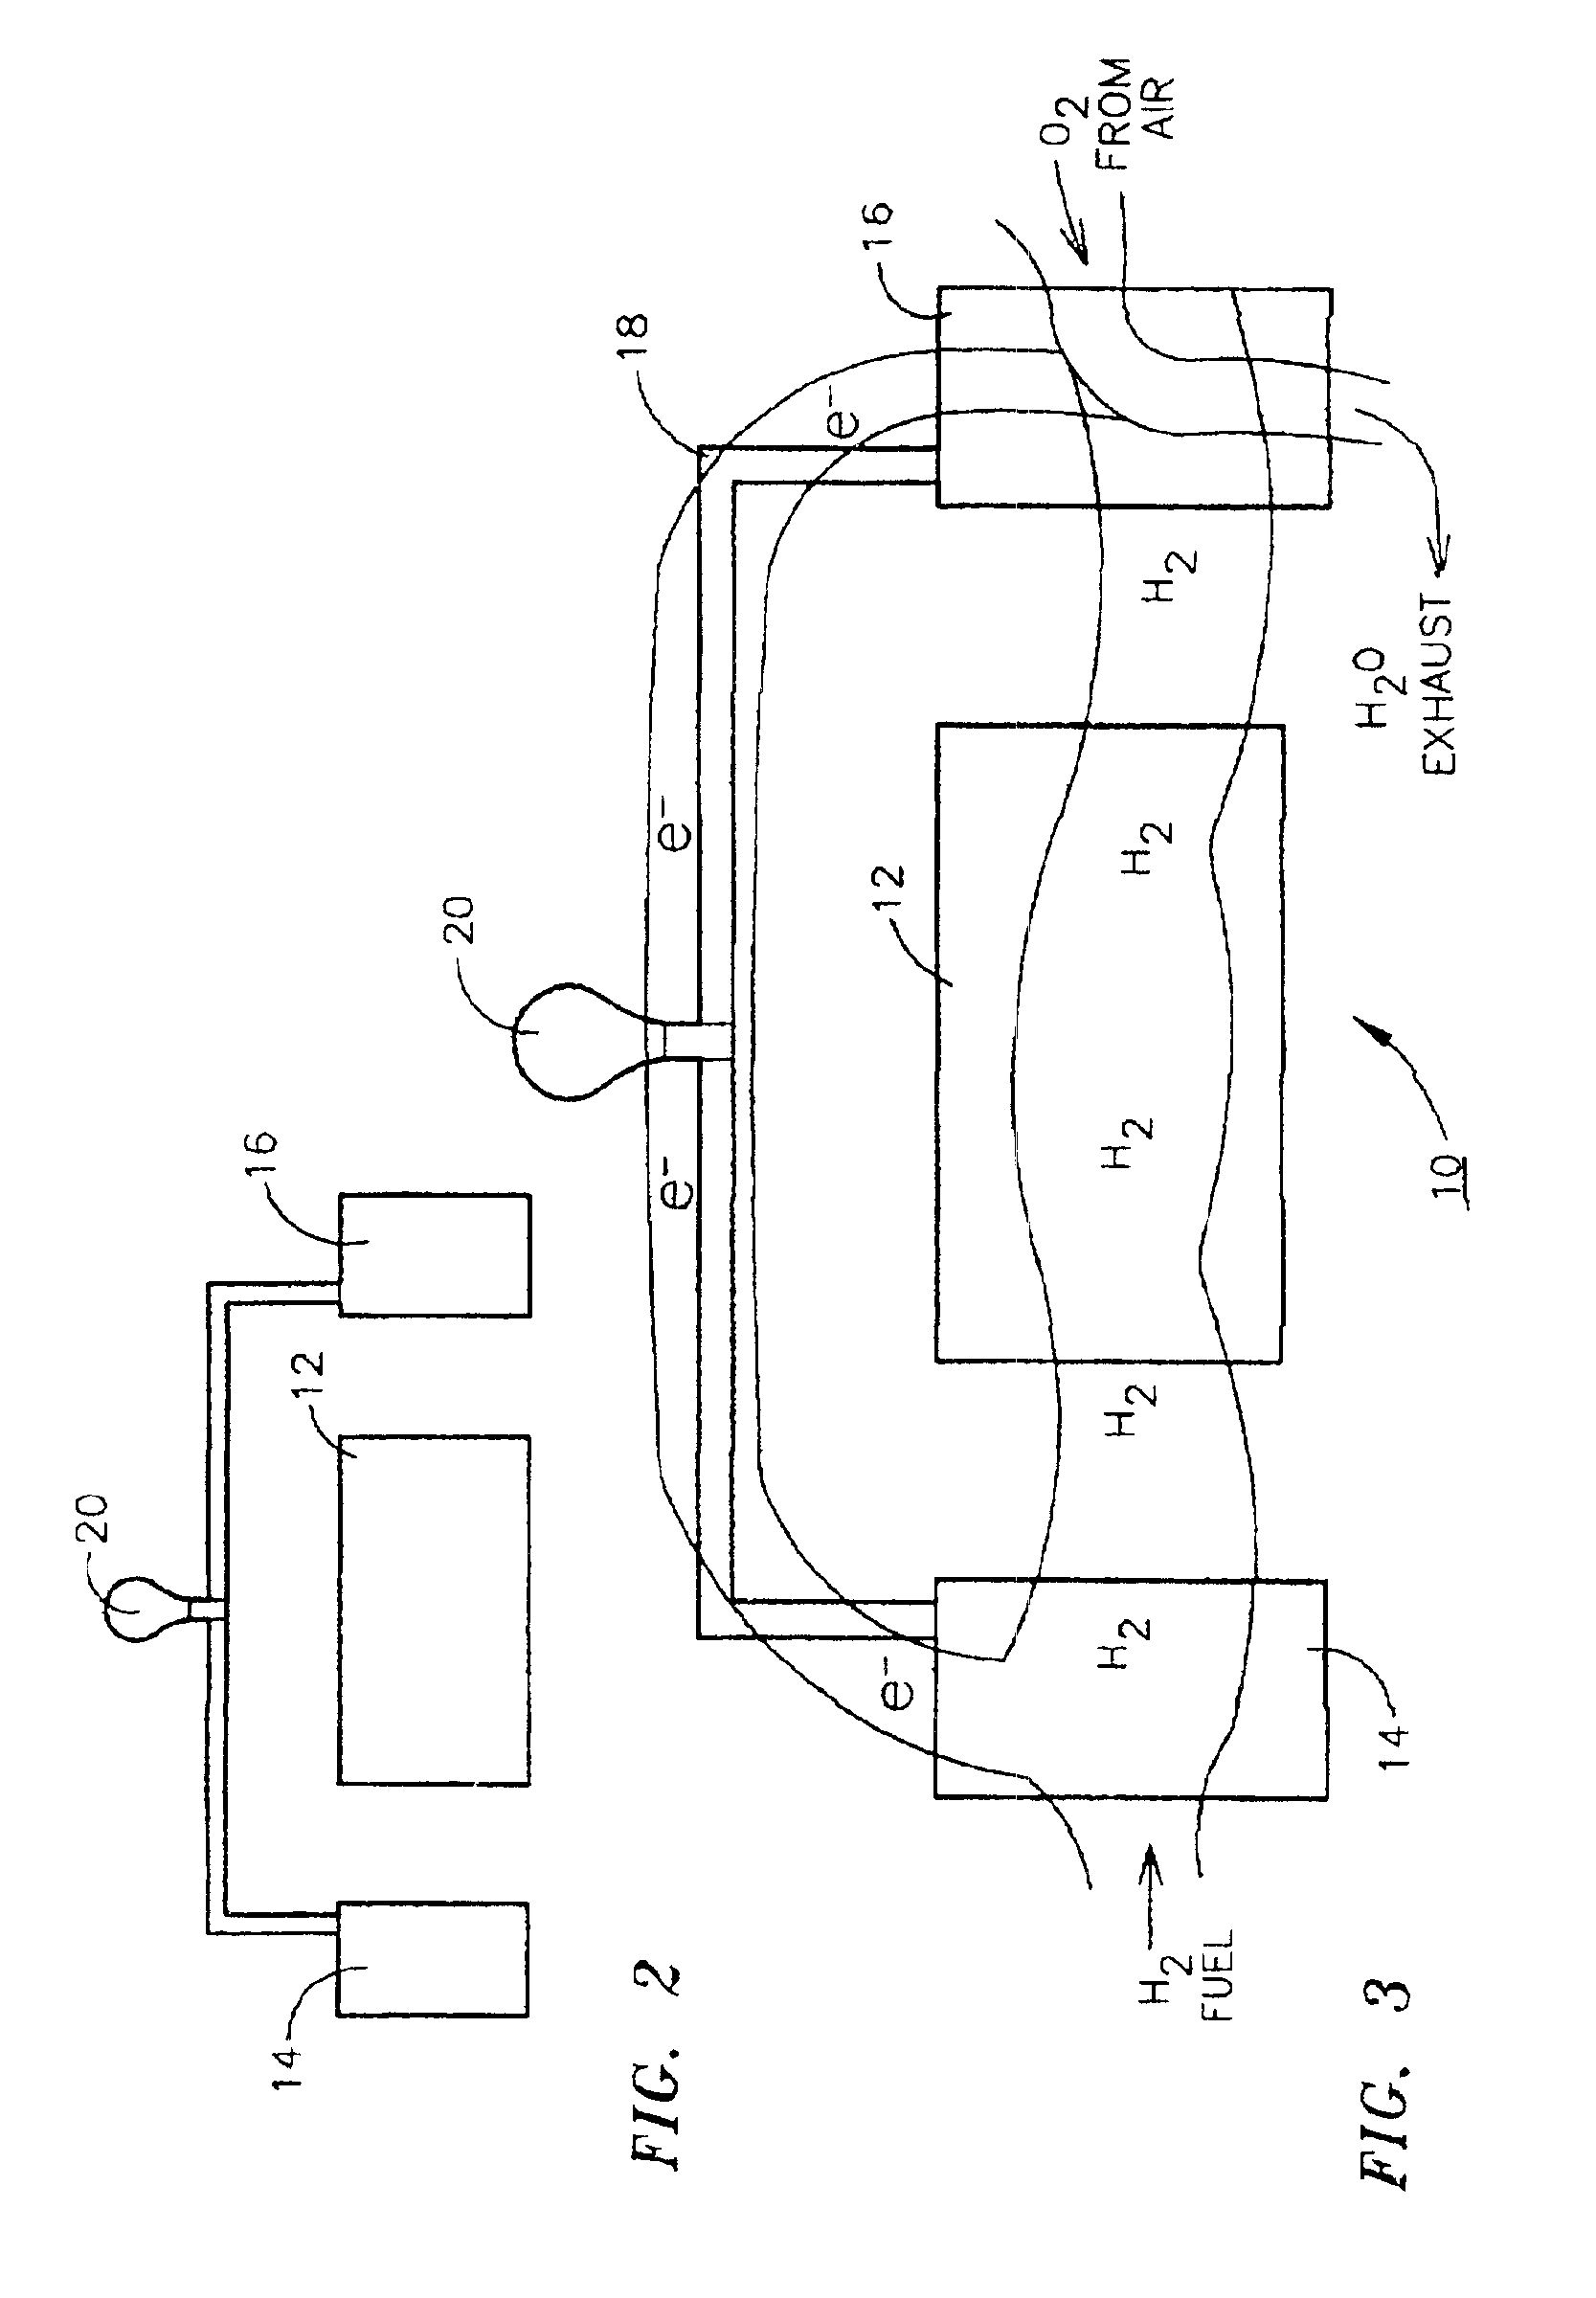 Electrochemical cell electrodes comprising coal-based carbon foam